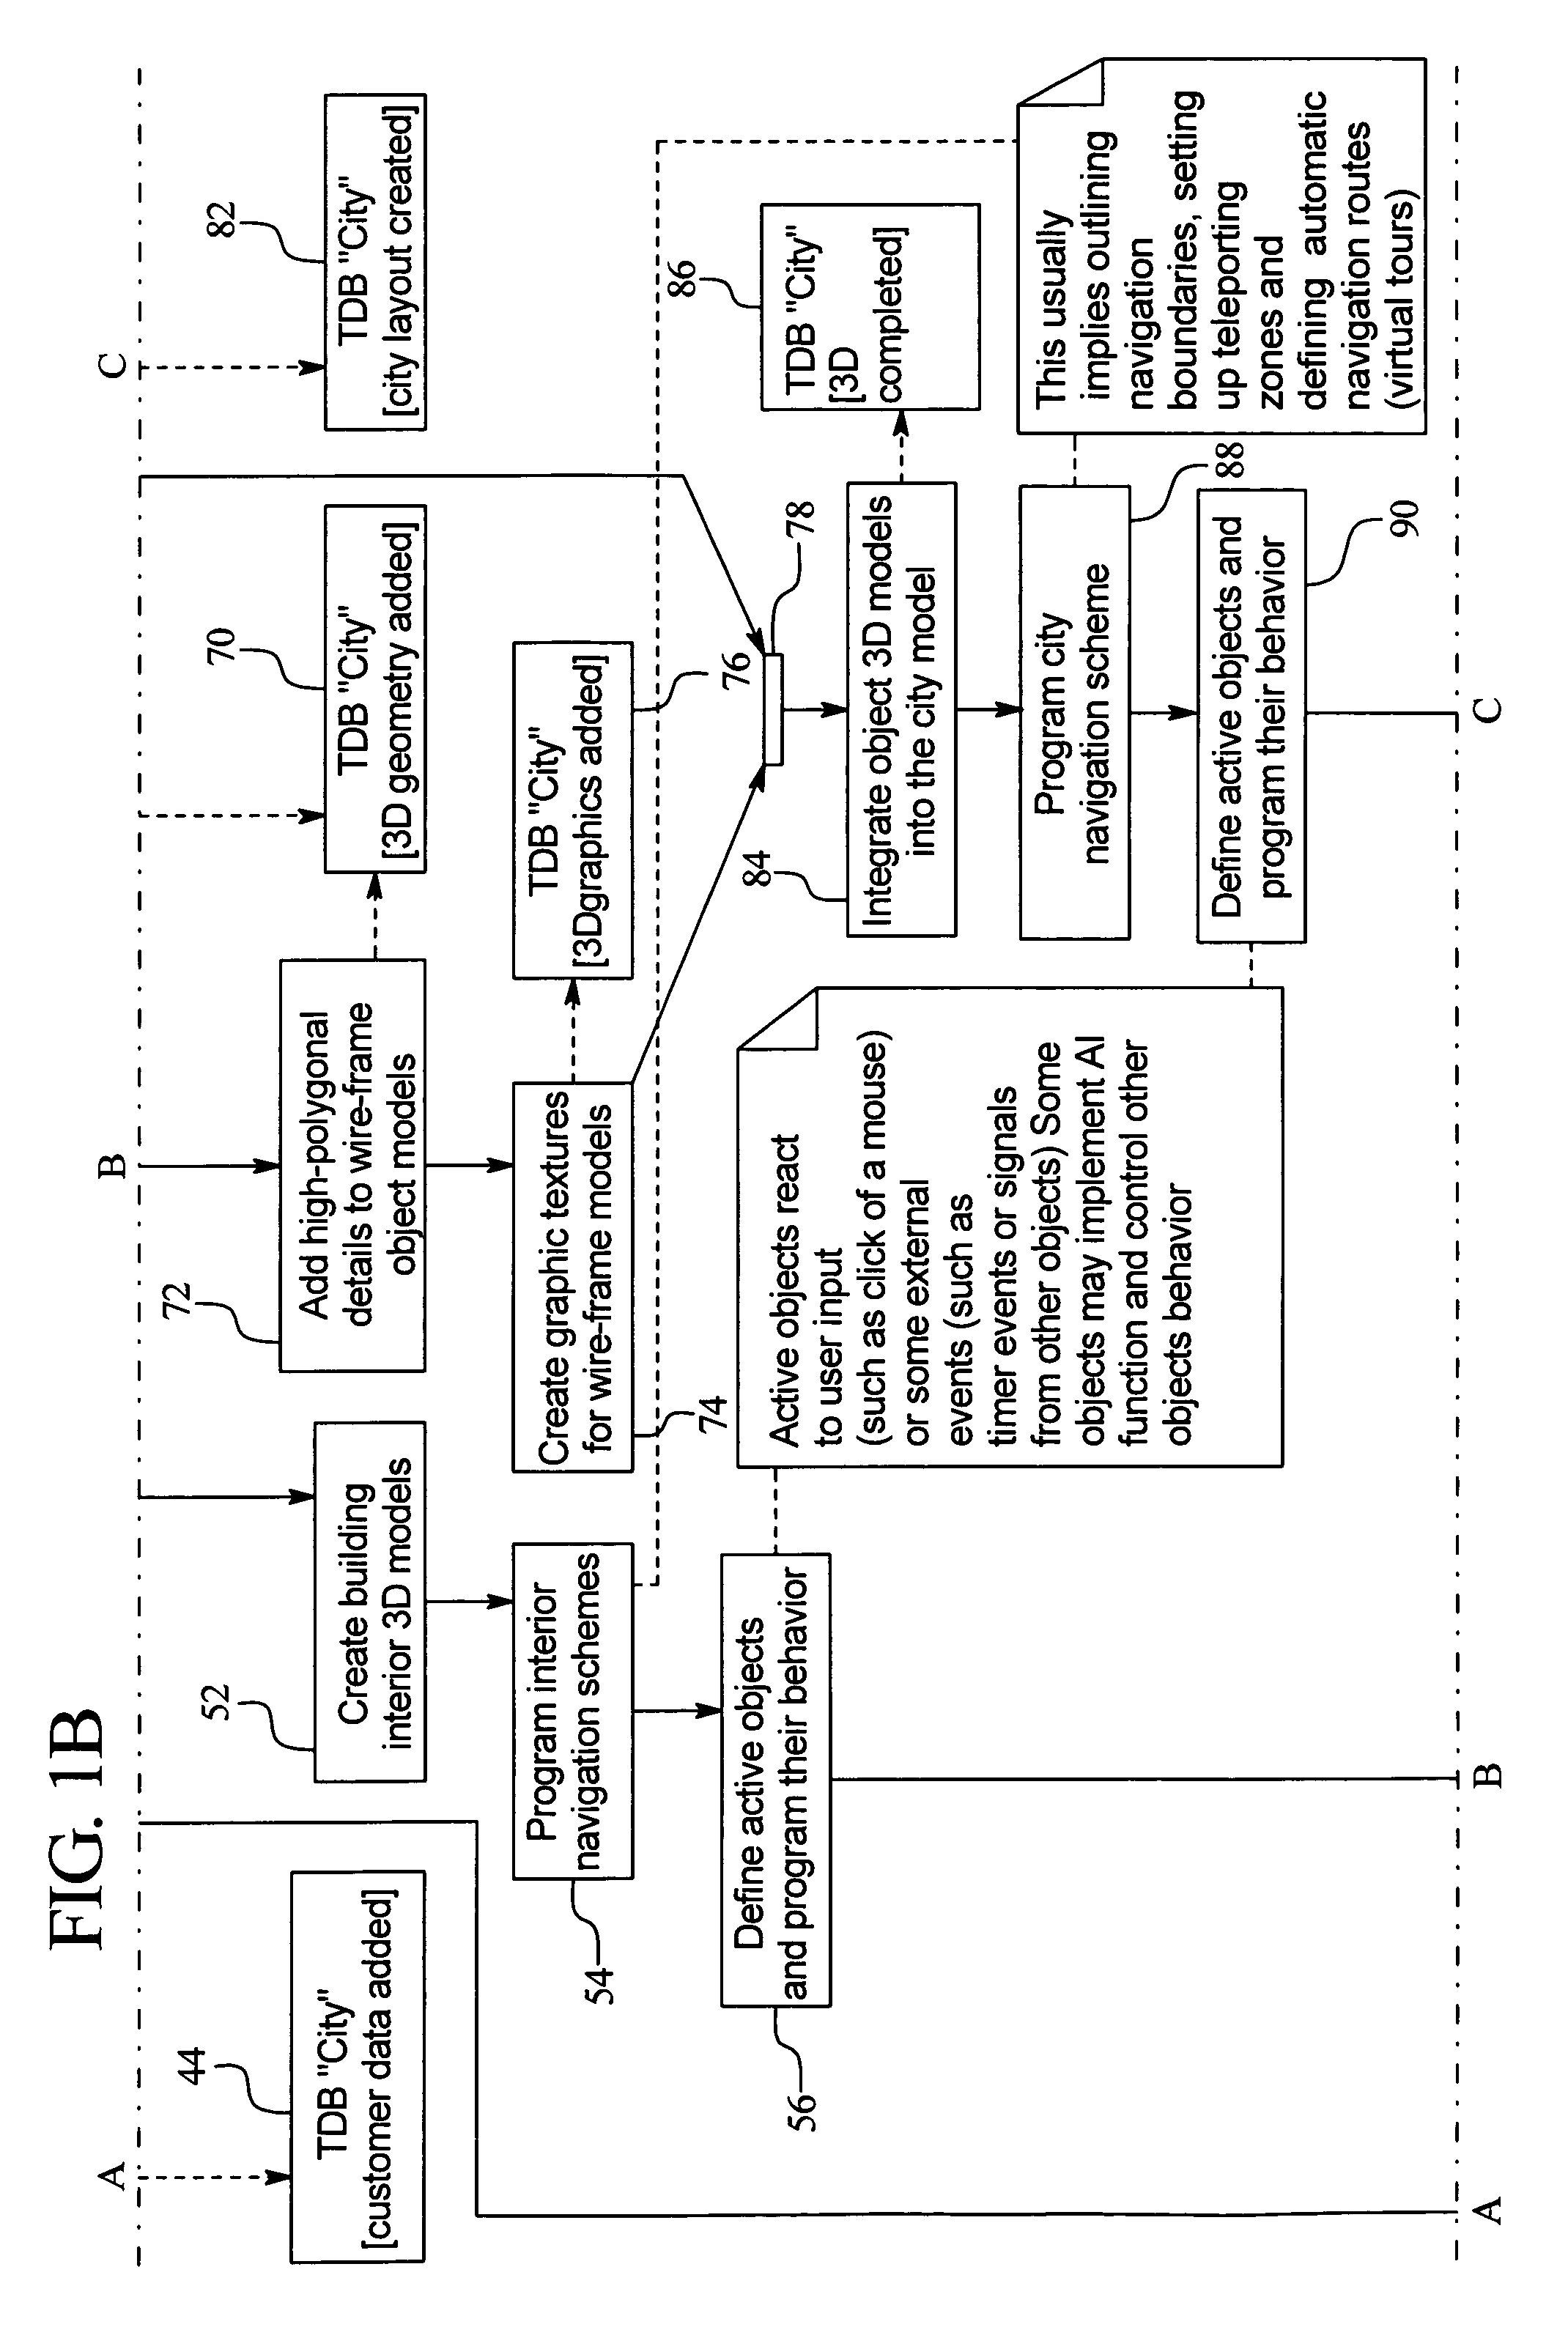 Apparatus and method for creating a virtual three-dimensional environment, and method of generating revenue therefrom